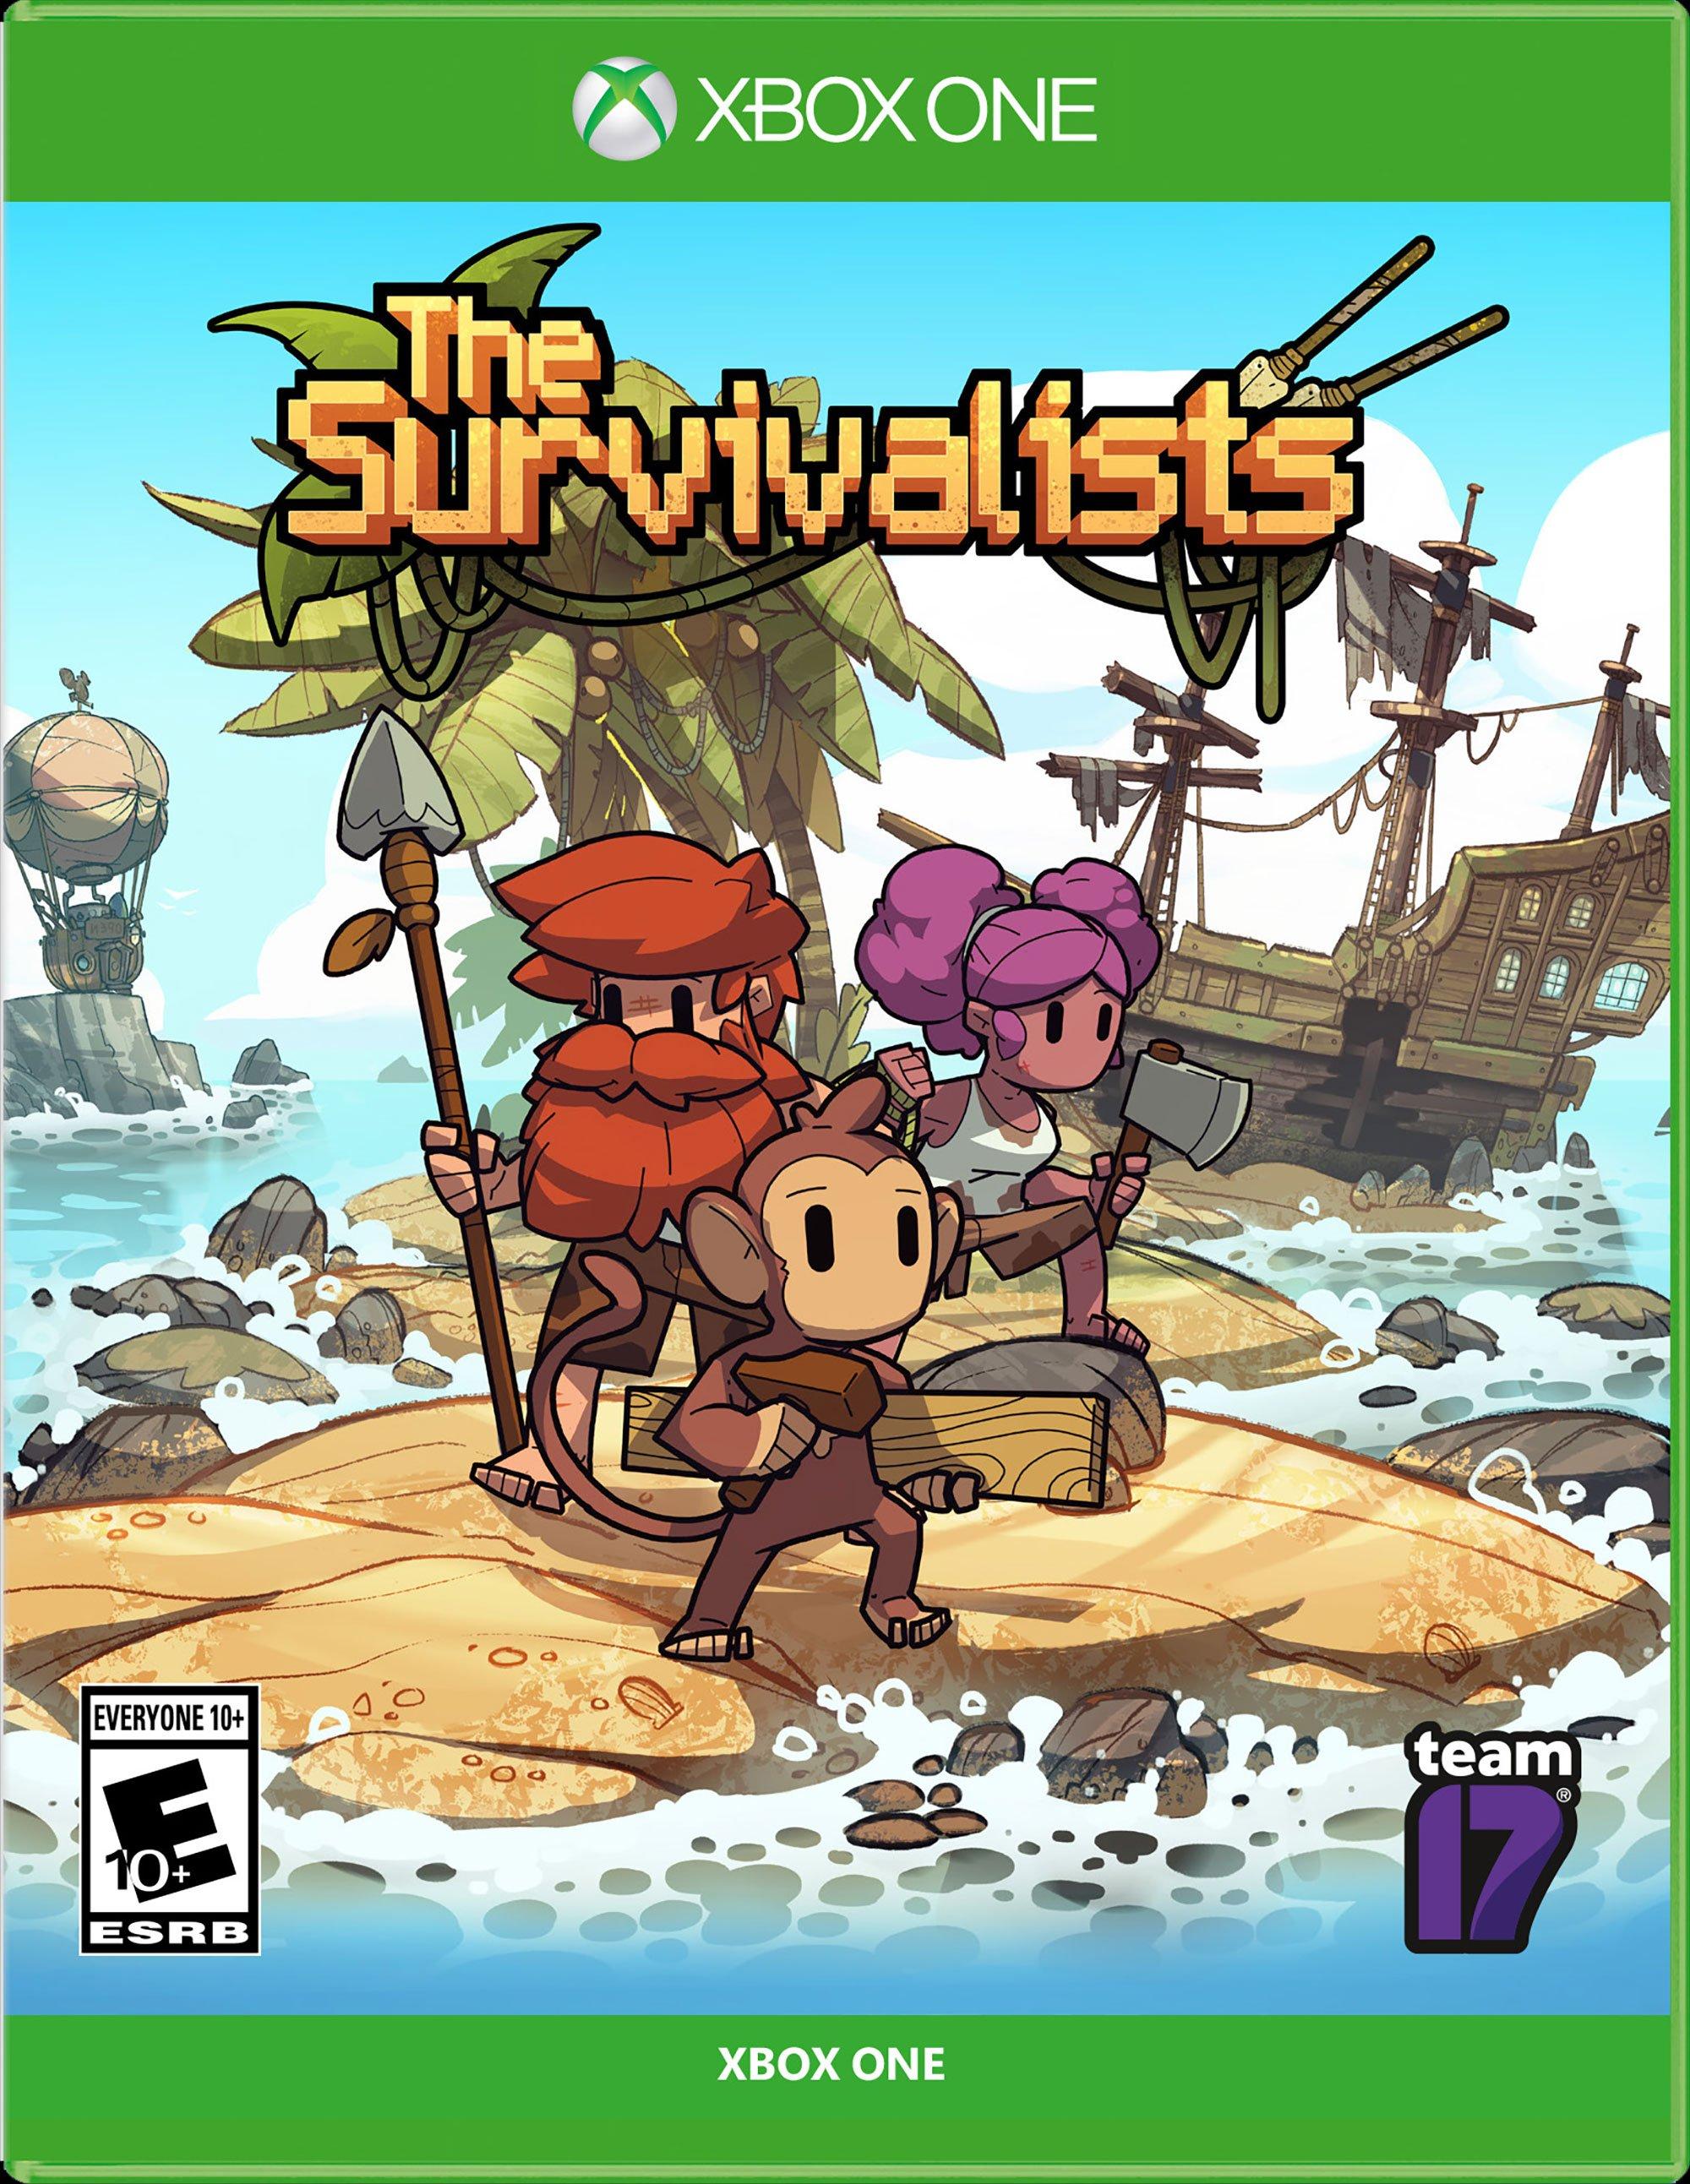 The Survivalists - Xbox One